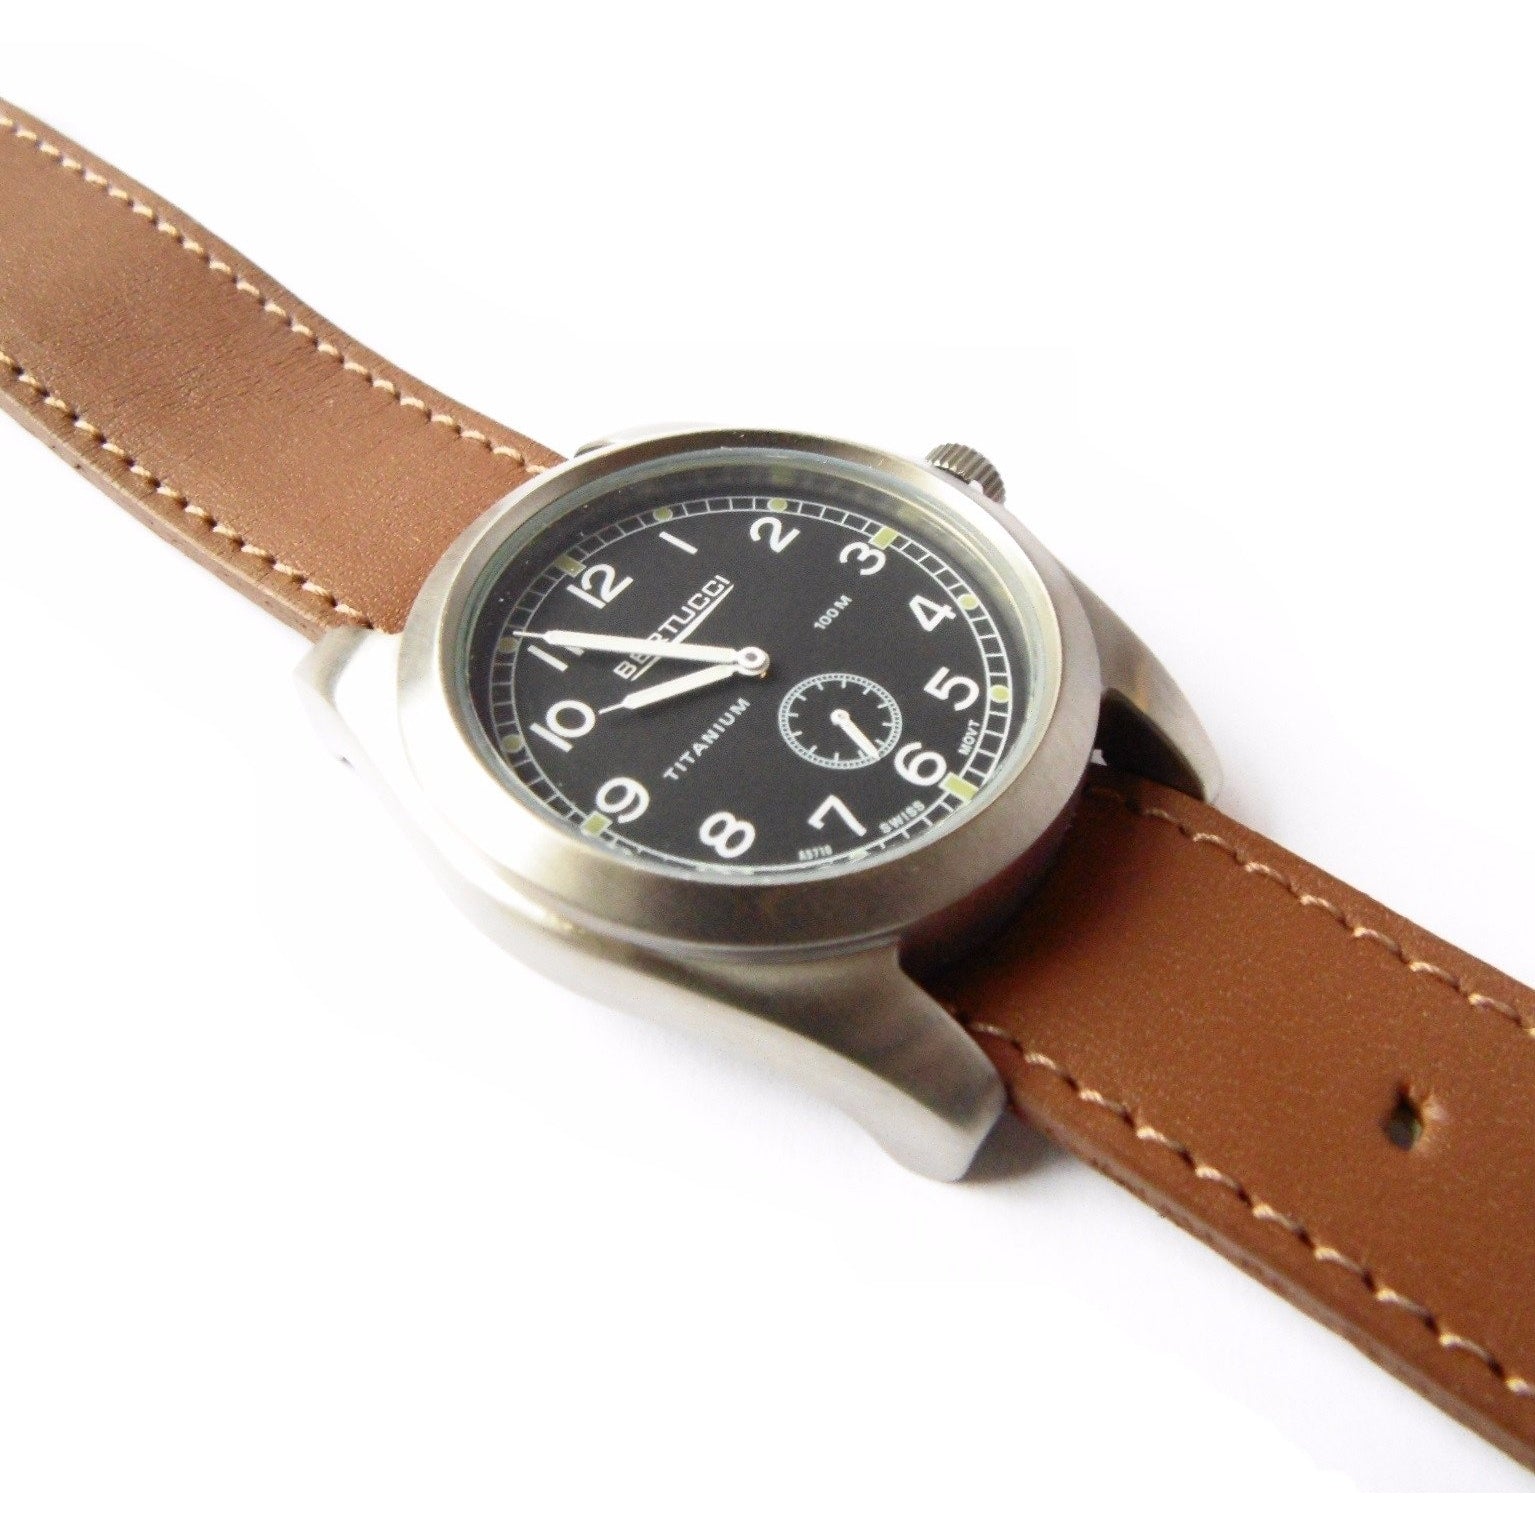 Bertucci 13301 A-3T 42 Vintage Watch (Leather Strap) - Watchfinder General - UK suppliers of Russian Vostok Parnis Watches MWC G10
 - 2